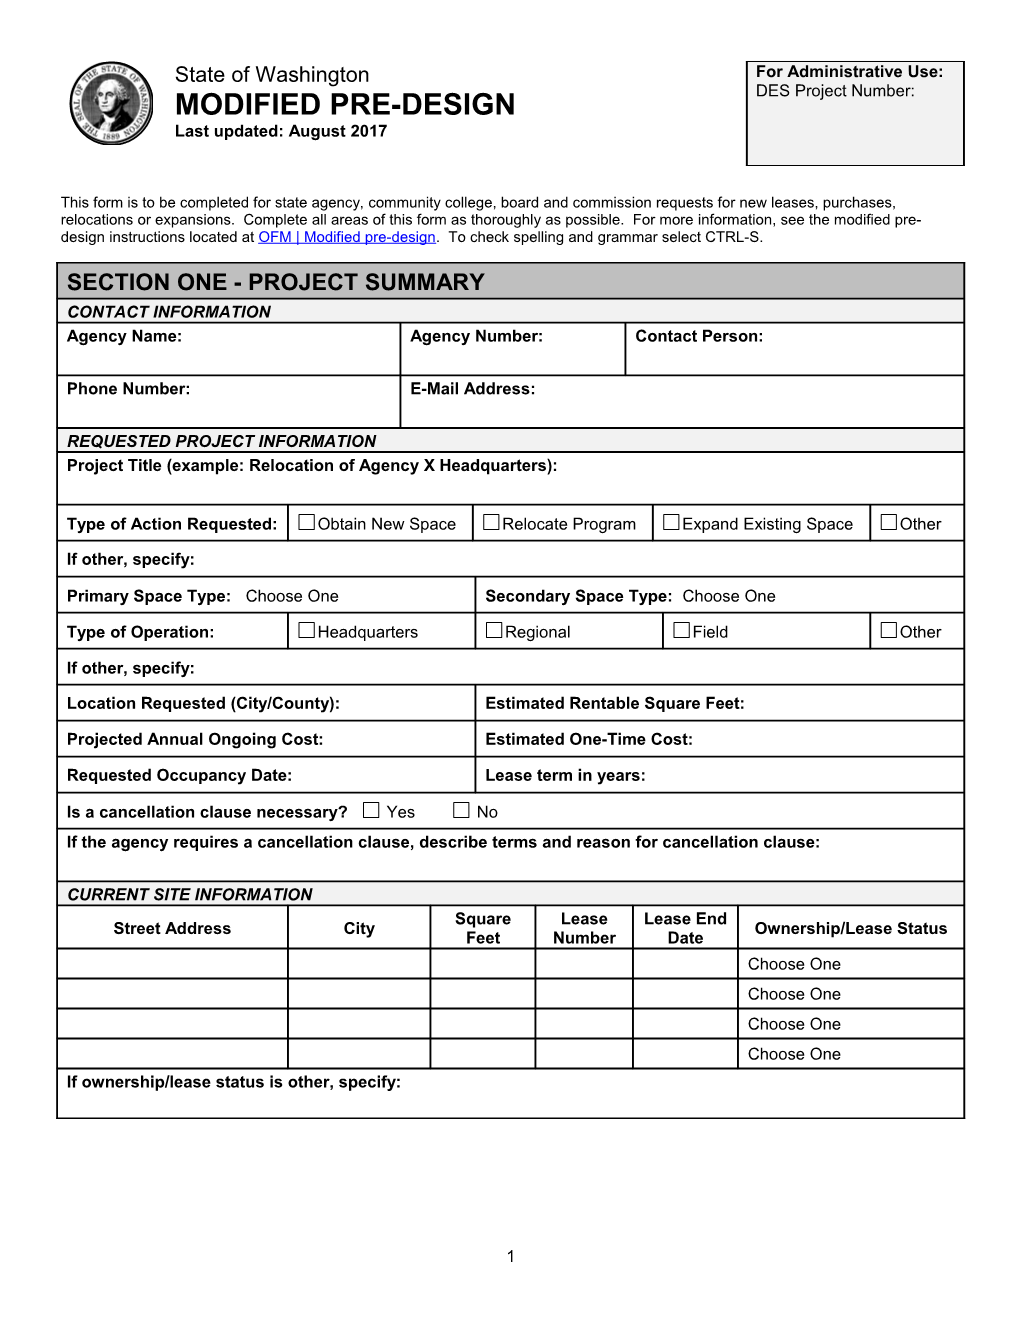 This Form Is to Be Completed for State Agency, Community College, Board and Commission